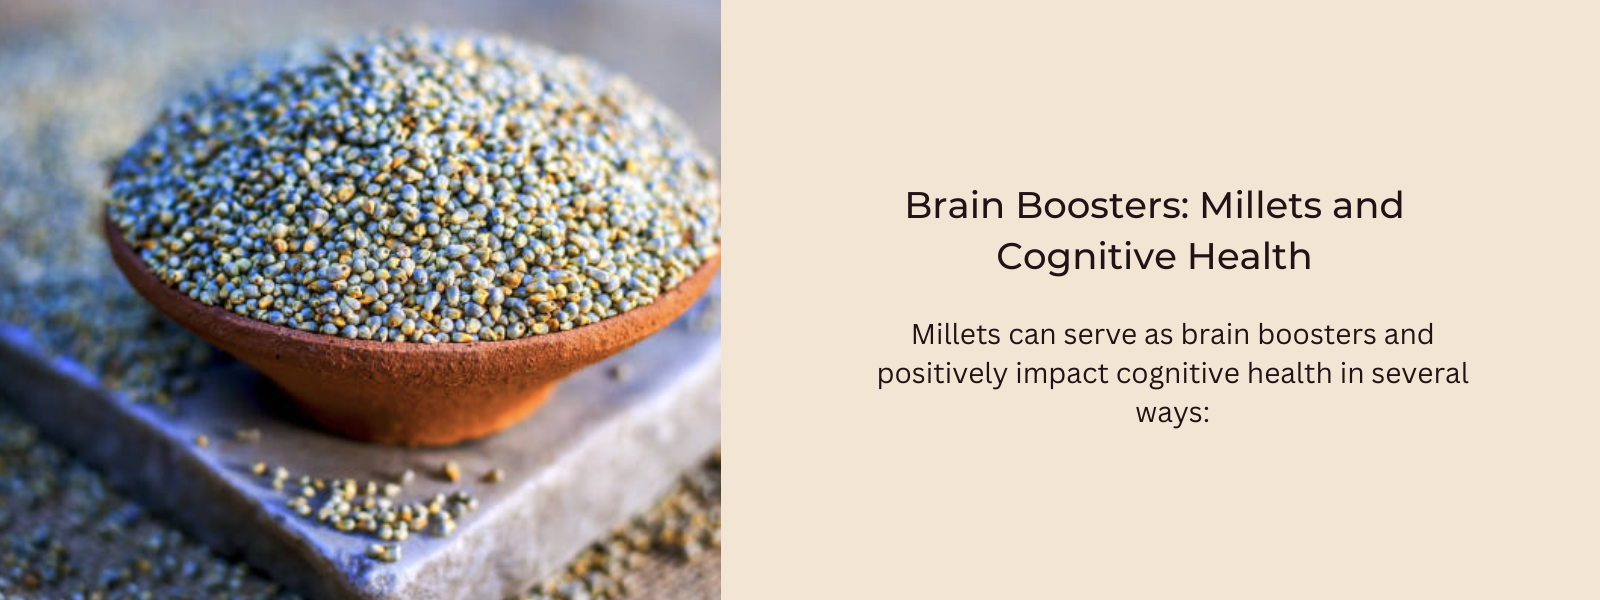 Brain Boosters: Millets and Cognitive Health